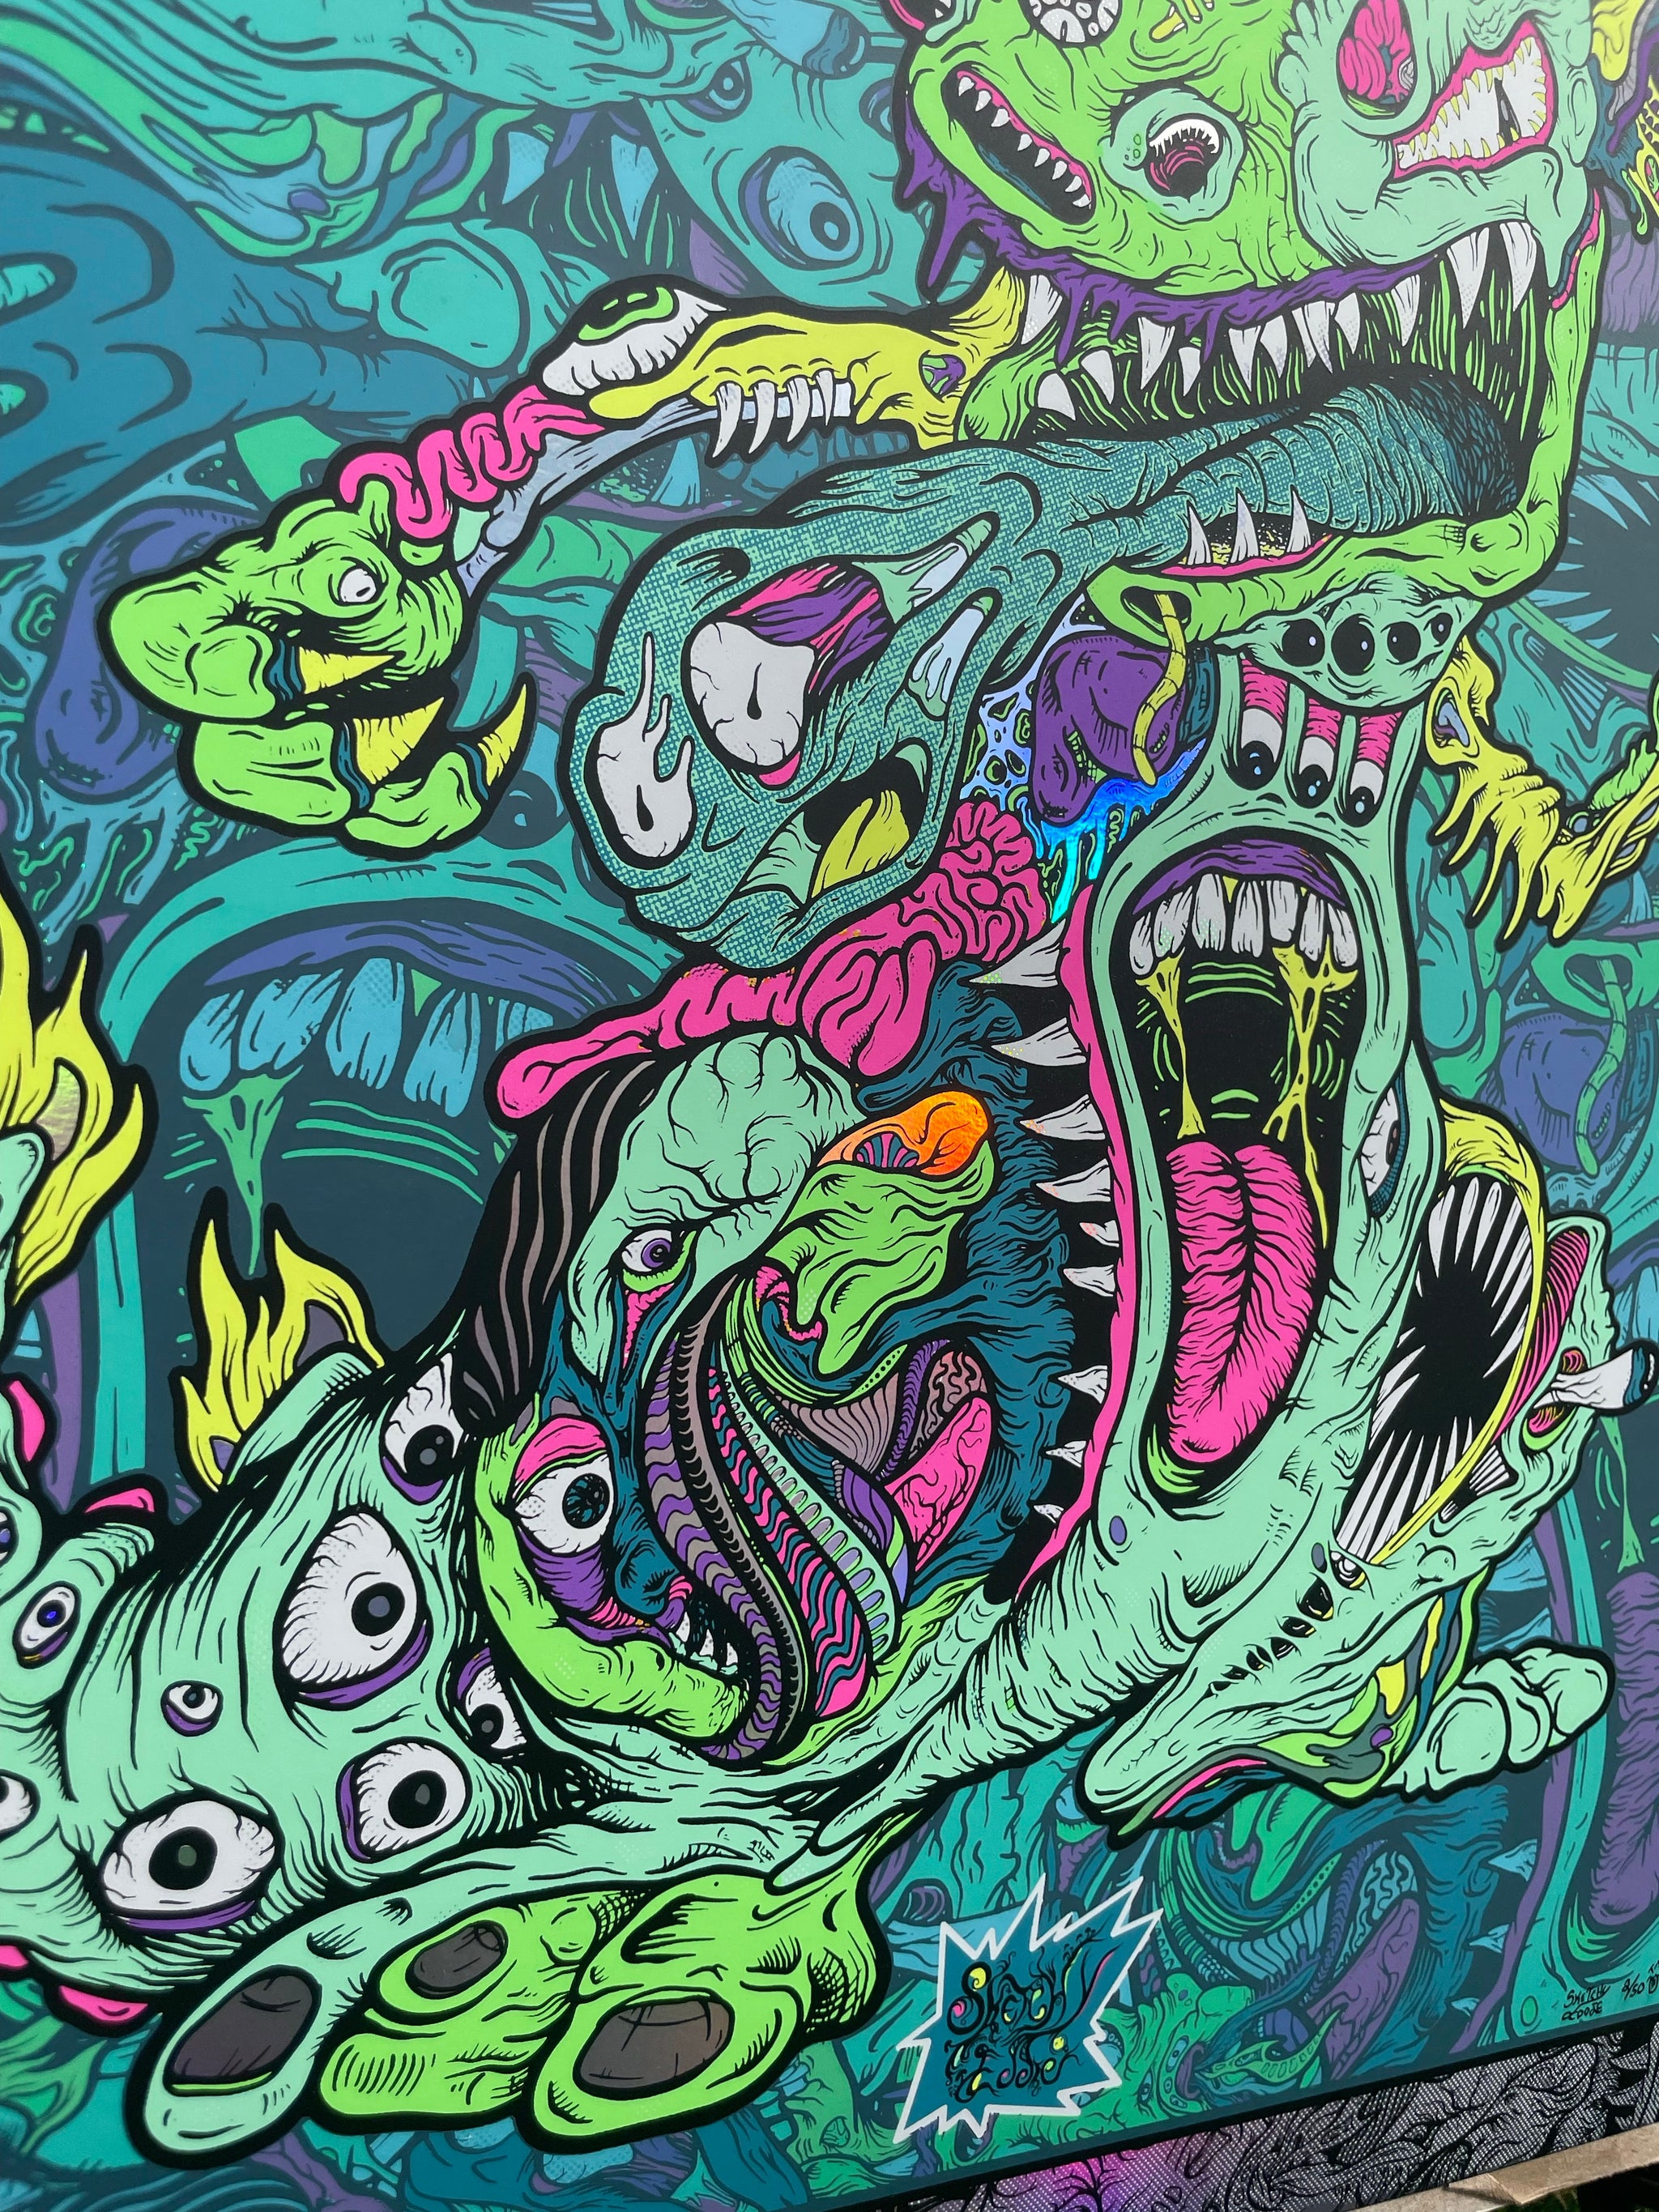 "Reptar's Revenge" Limited Edition | Holographic Foil | Poster